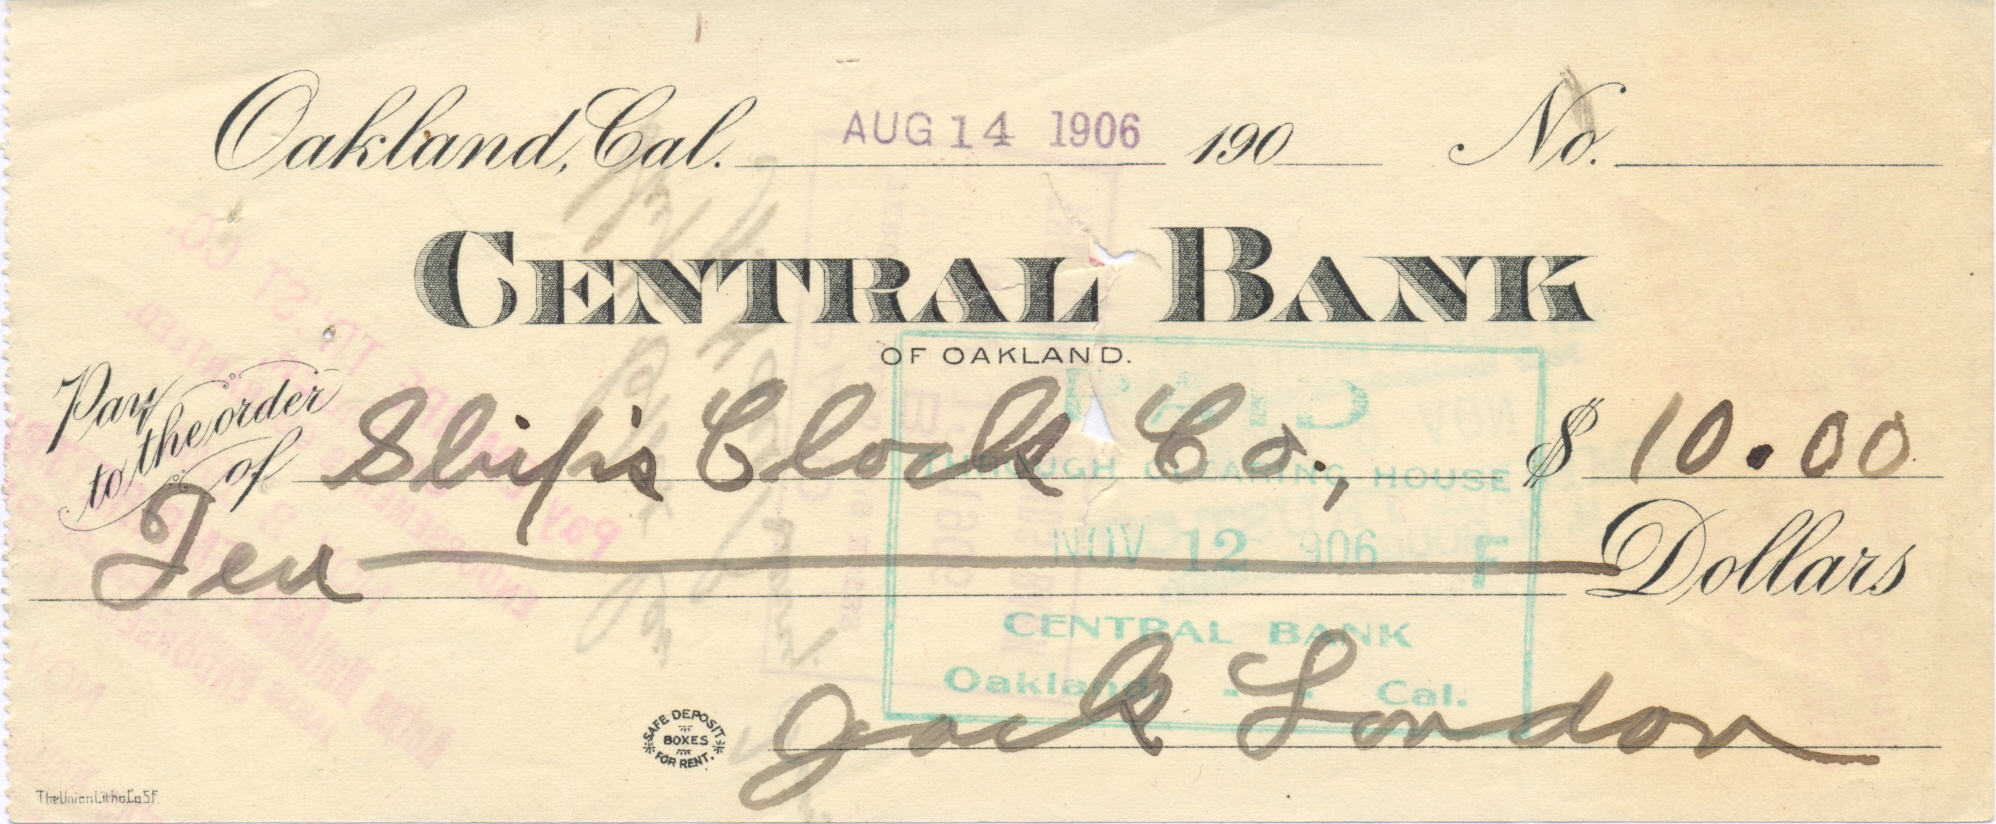 LONDON JACK: (1876-1916) American Author. D.S., Jack London, being a signed cheque, Oakland, 14th